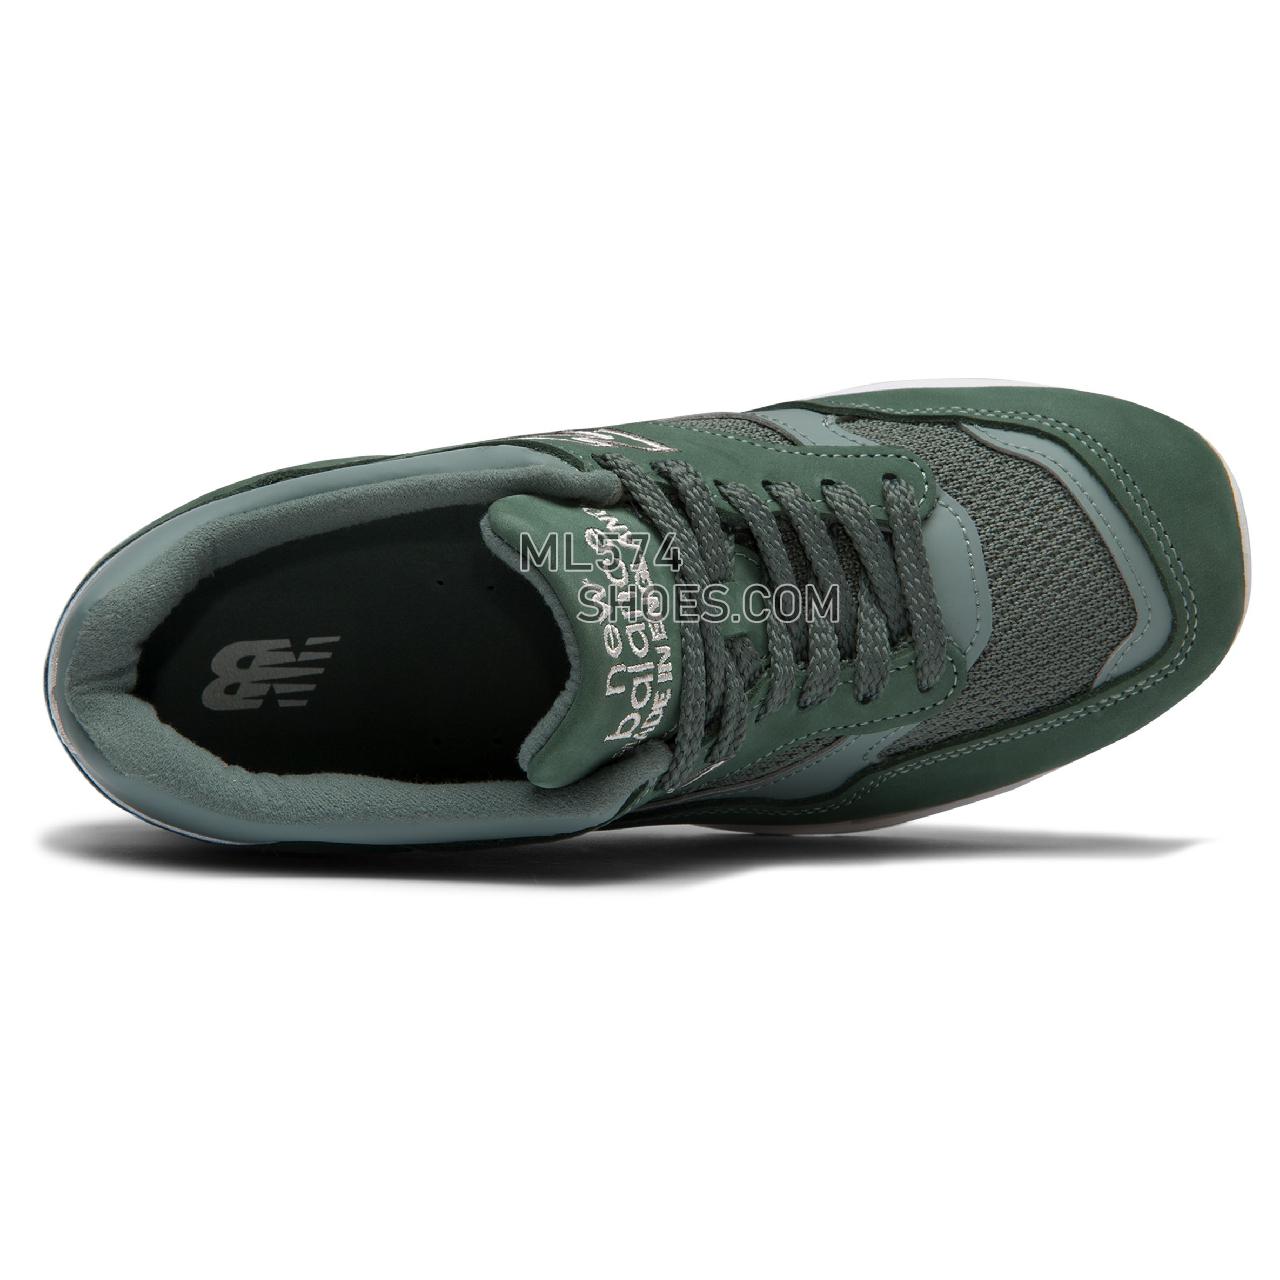 New Balance Made in UK 1500 Poisonous Plants - Men's 1500 Made in UK Poisonous Plants - Laurel Wreath - W1500EPI